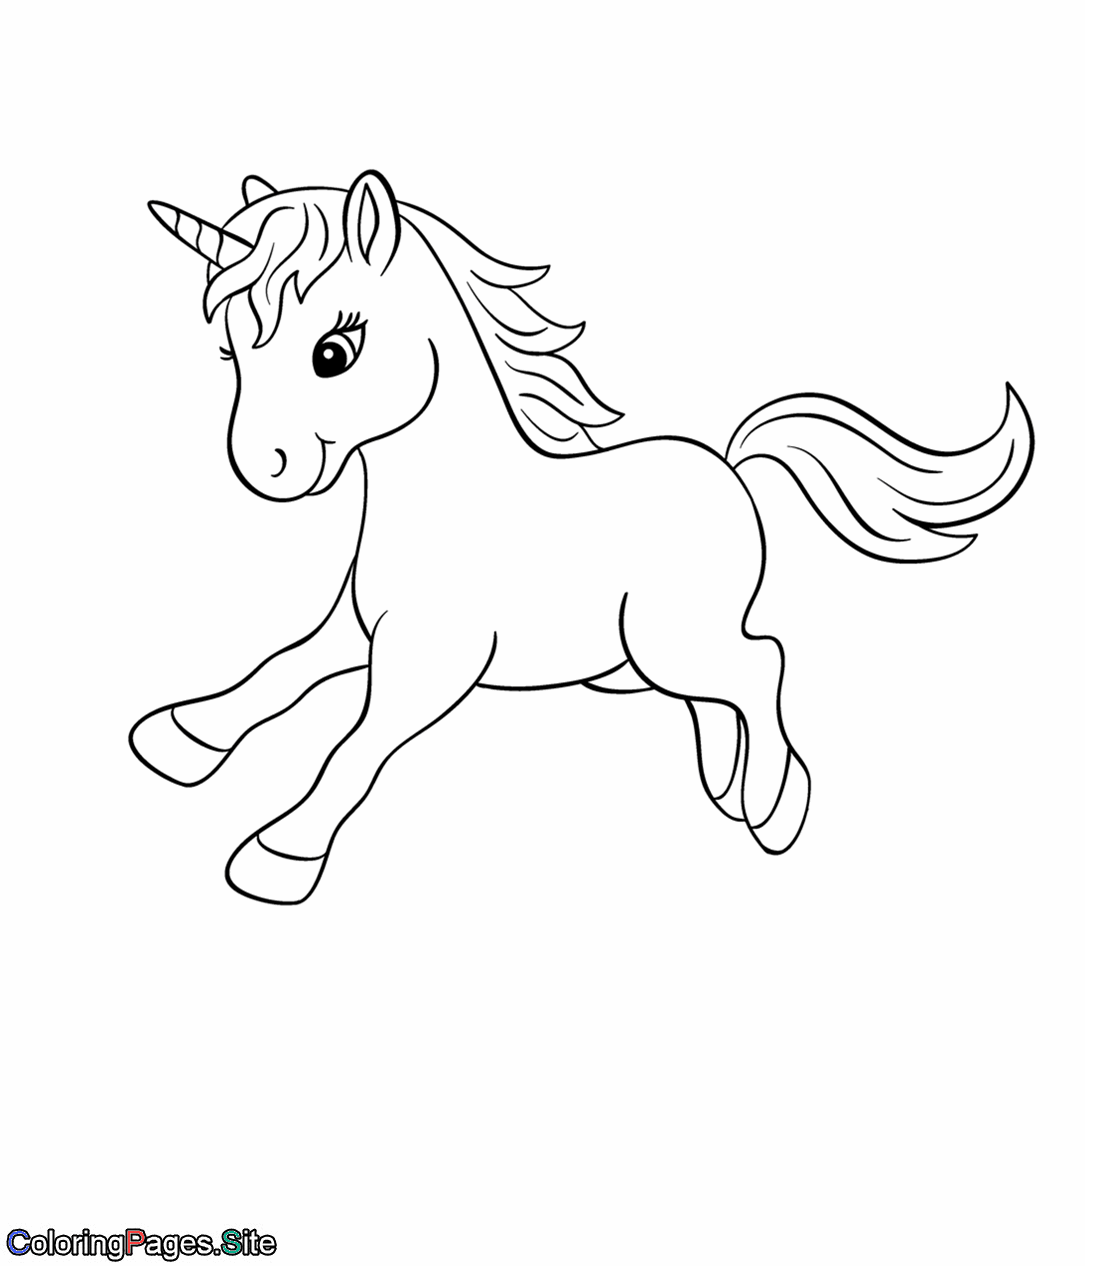 coloring : Baby Unicorn Coloring Page Pages Cute Fantastic Of ...